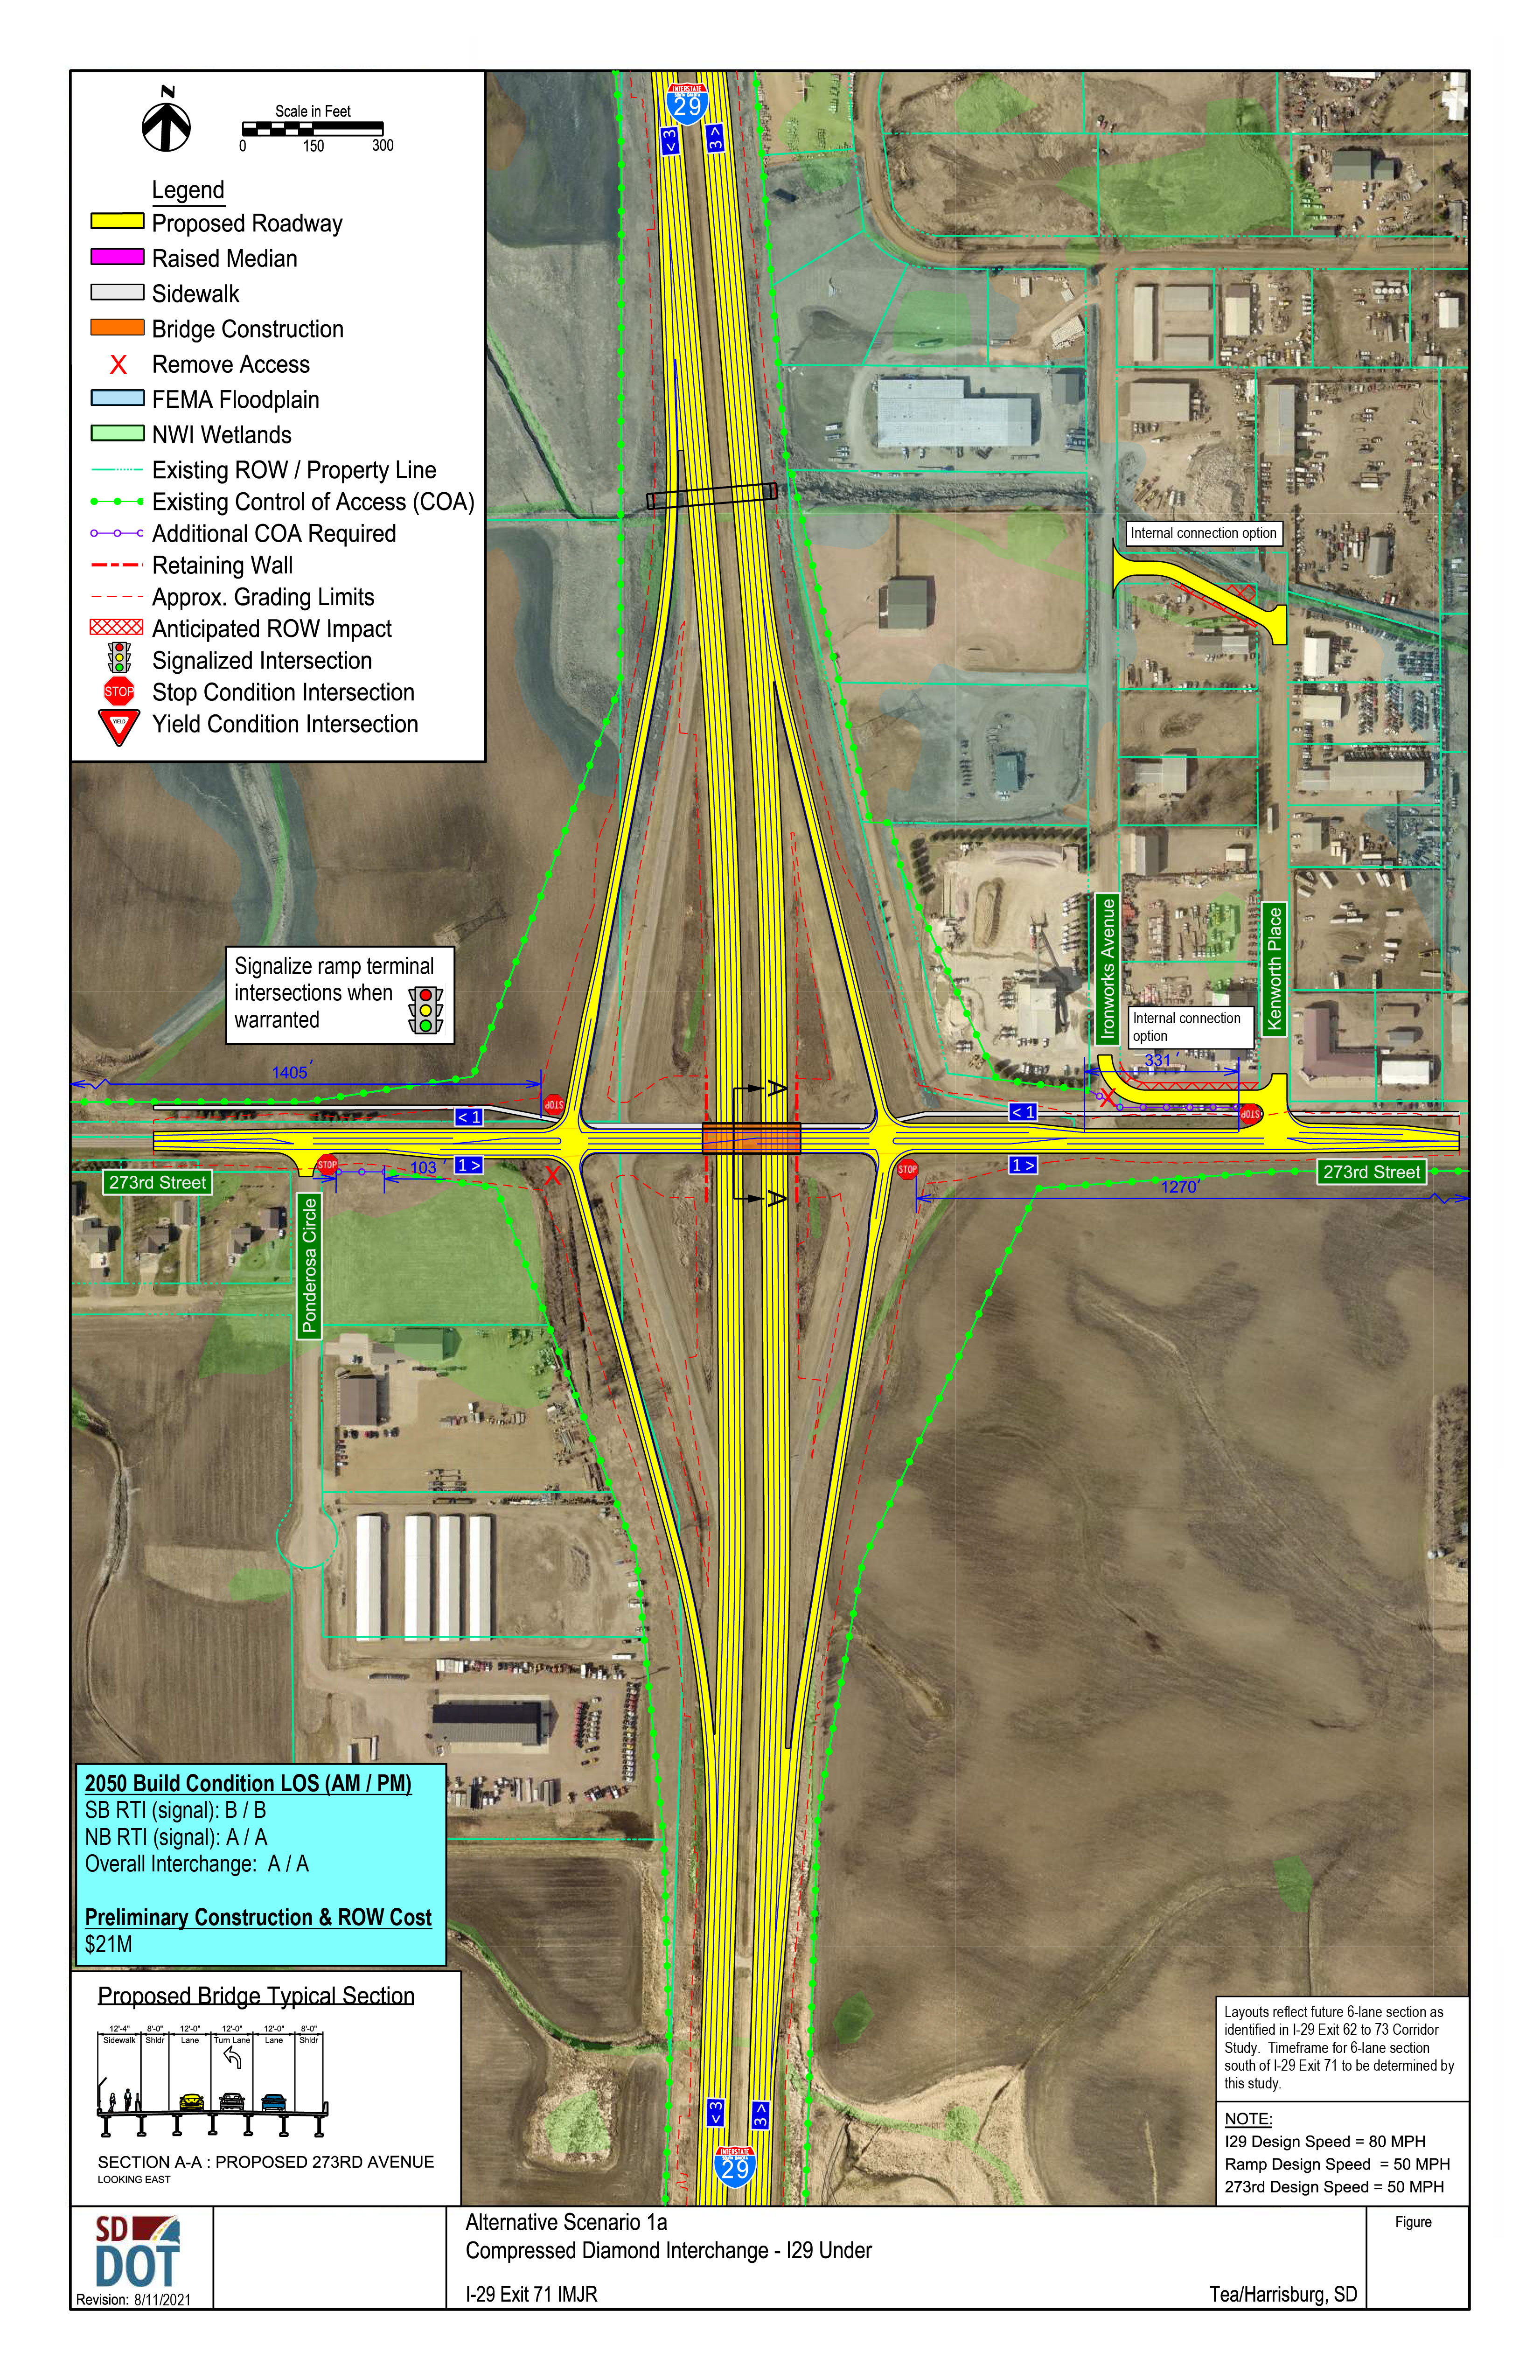 This image shows the conceptual layout of a Compressed Diamond Interchange, and what the road under it would look like. Details on the diagram include proposed roadway, raised median, sidewalk, bridge construction, access control, FEMA floodplain, NWI wetlands, existing Right of Ways and property lines, existing control of access points, additional control of access points needed, retaining walls, grading limits, anticipated right of way impacts, signalized intersections, stop condition intersections and yield condition intersections. 